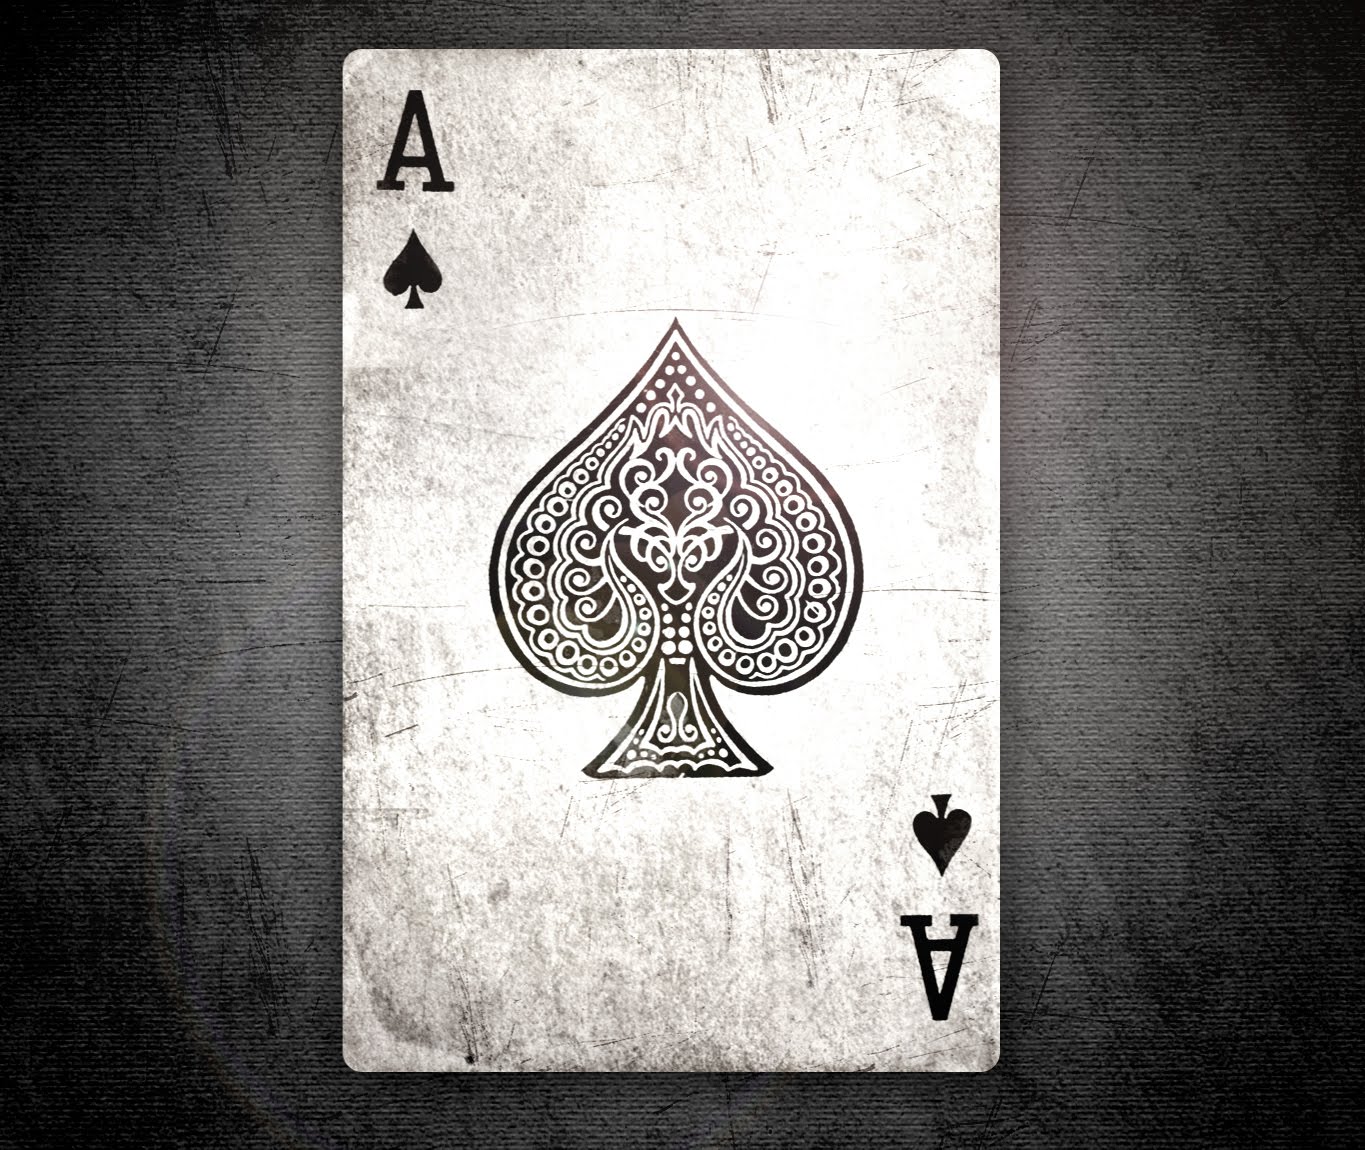 Free Ace Of Spades, Download Free Ace Of Spades png images, Free ...